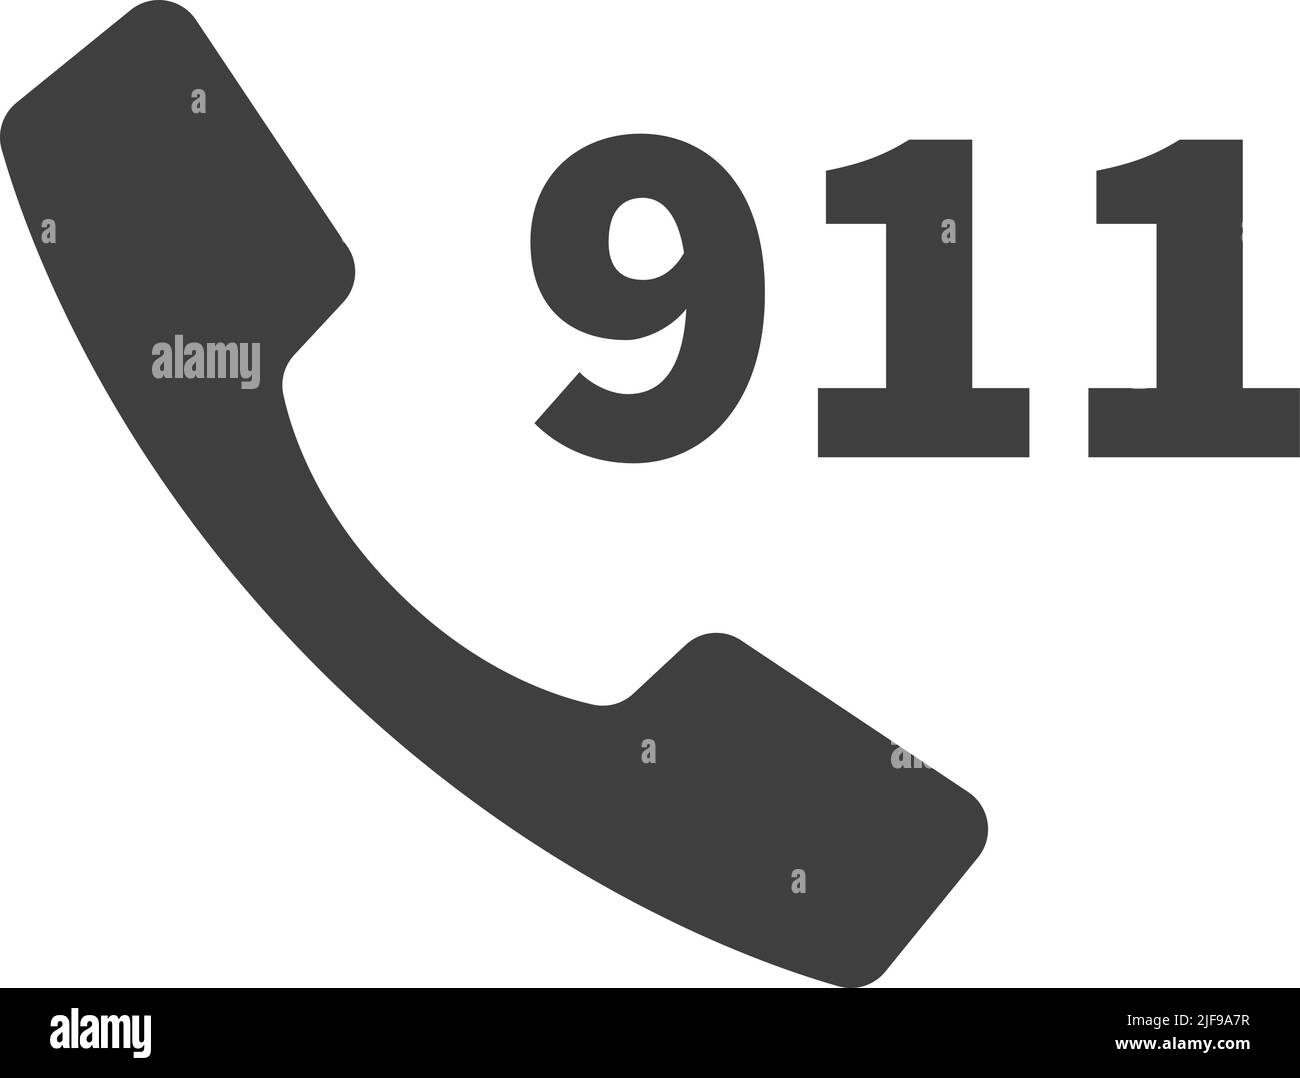 Handset with 911 emergency number, simple black icon on white Stock Vector